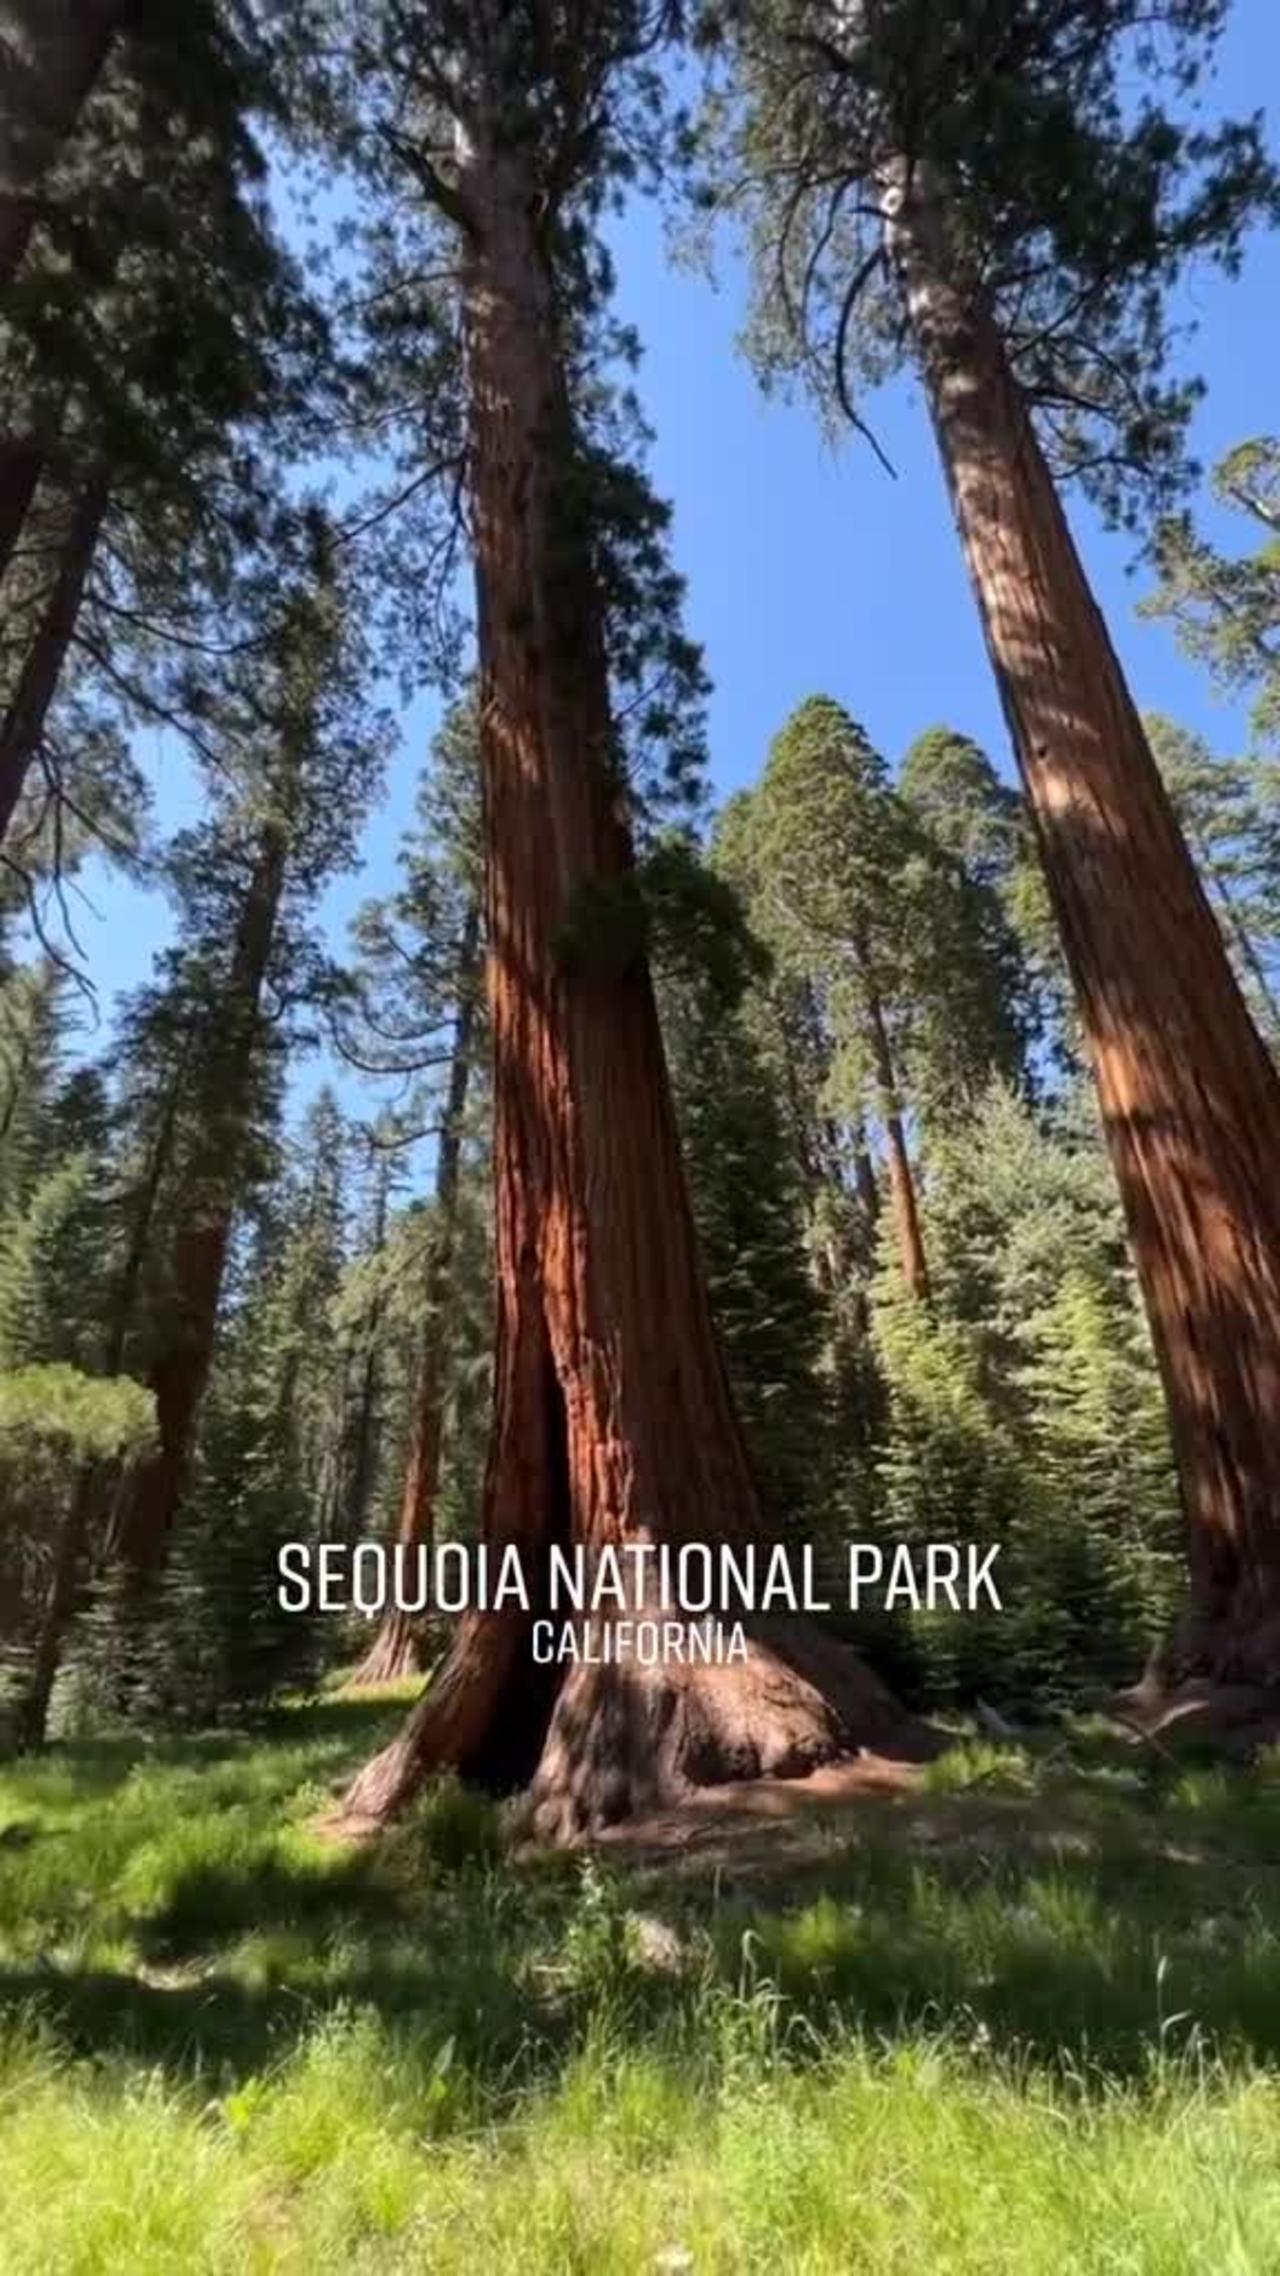 Sequoia National Park is a super cool yet underrated National Park in California